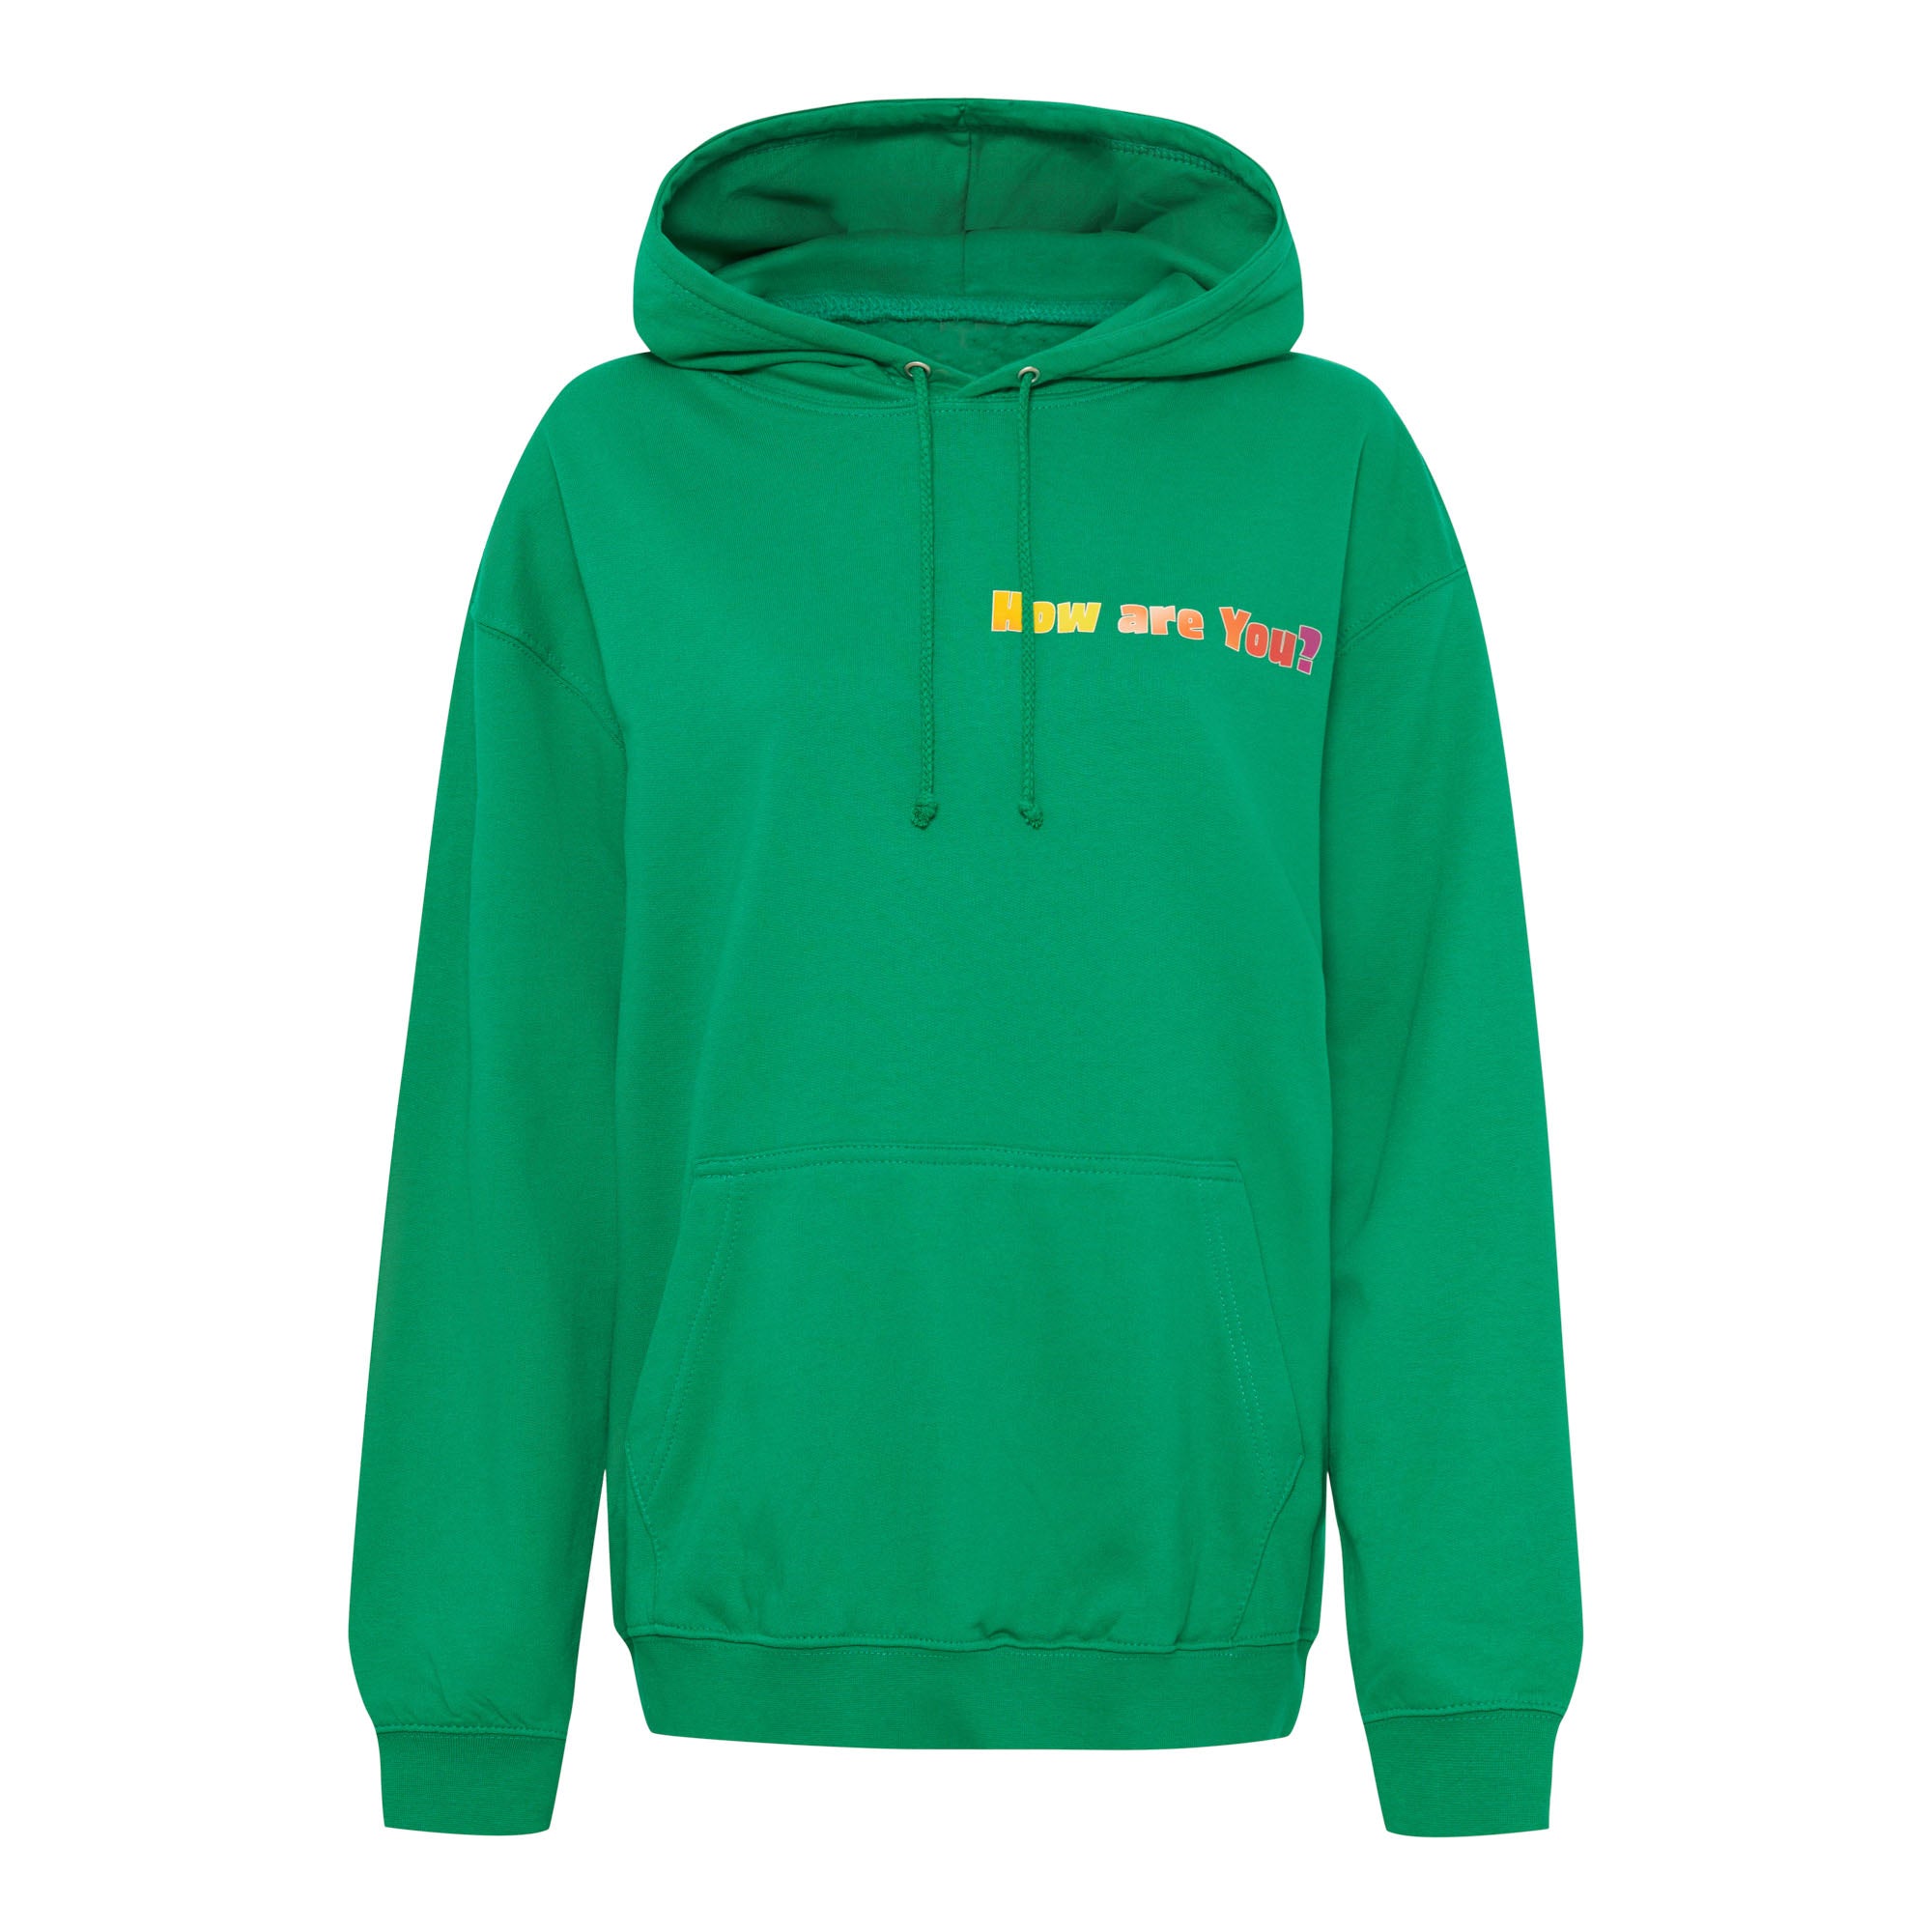 How are you? - Unisex Hoodie